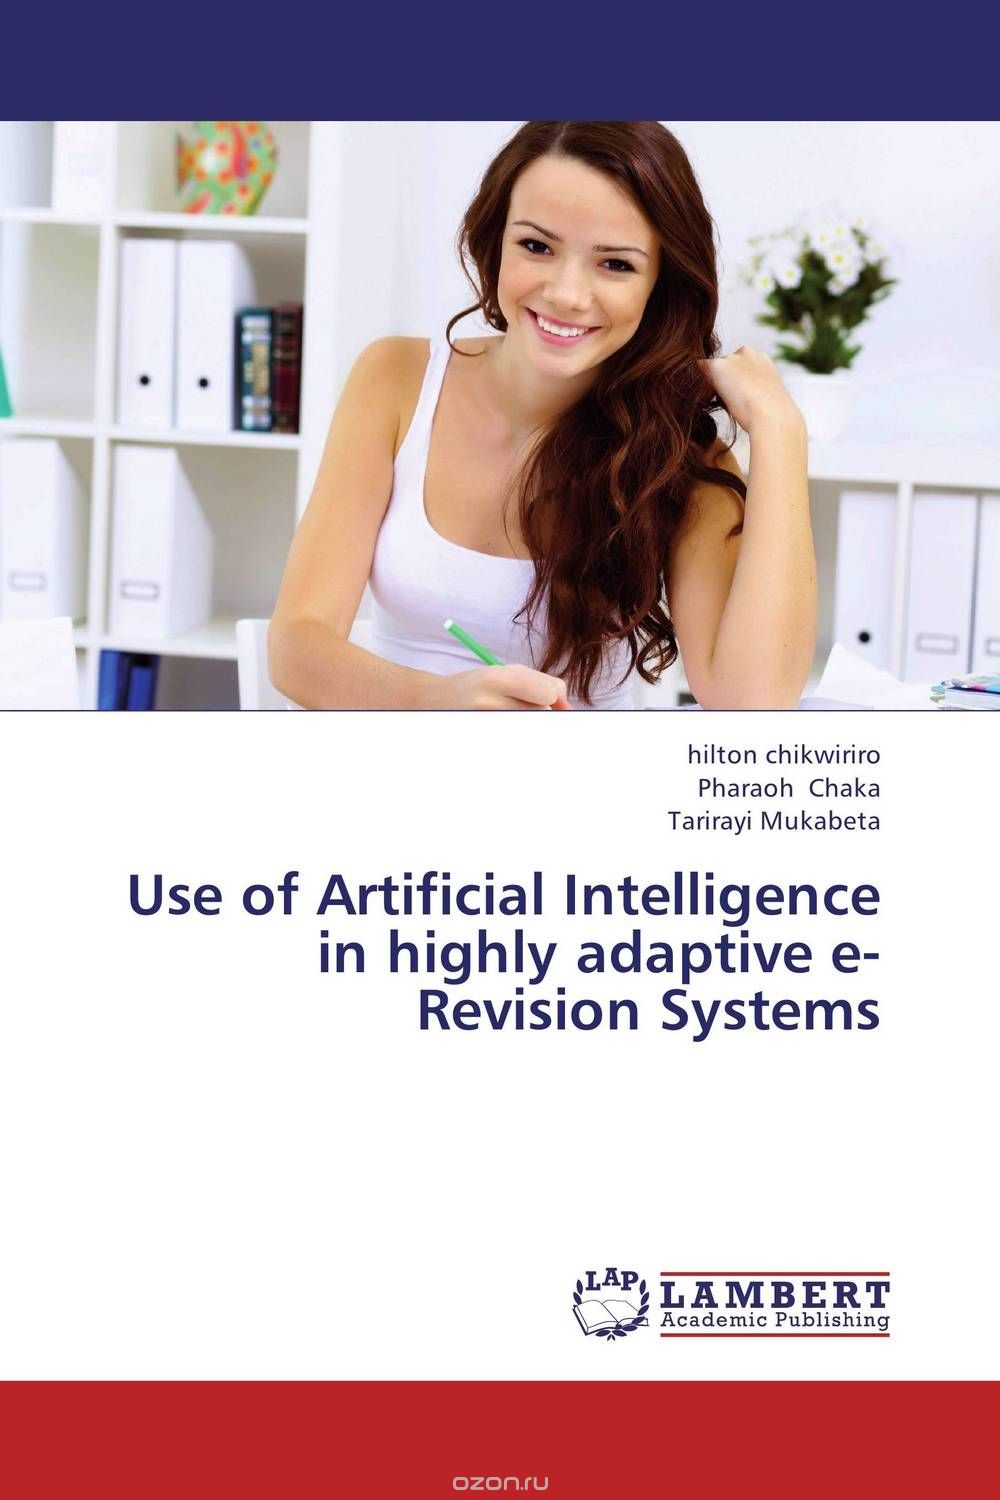 Скачать книгу "Use of Artificial Intelligence in highly adaptive e-Revision Systems"